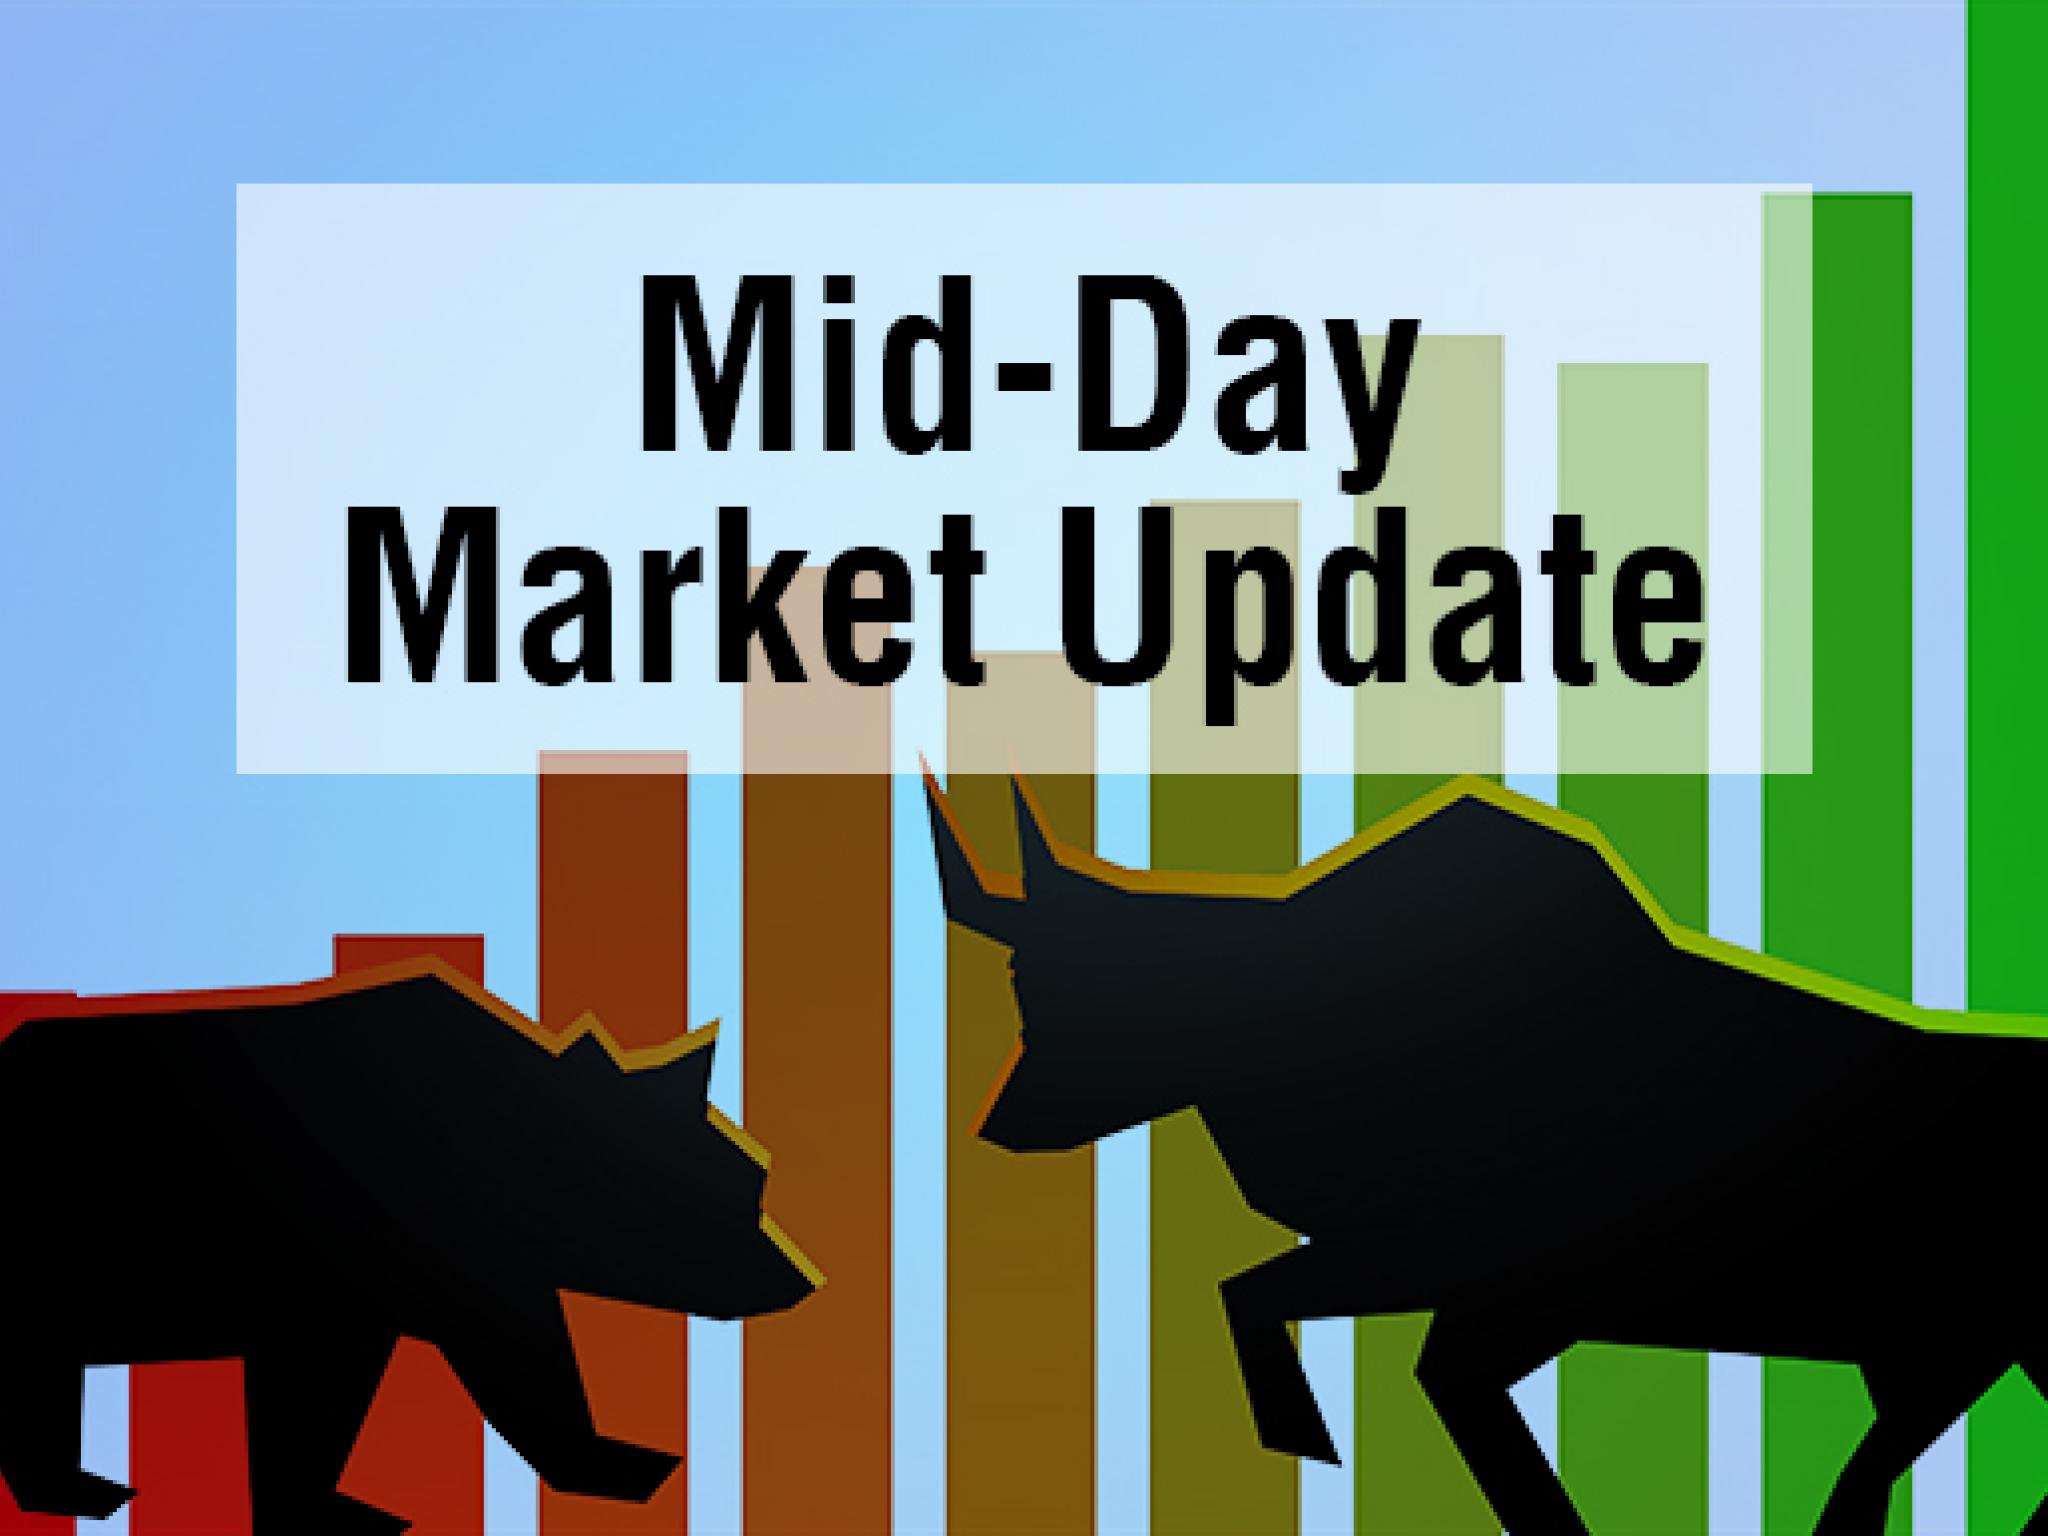  mid-day-market-update-crude-oil-down-2-synlogic-shares-spike-higher 